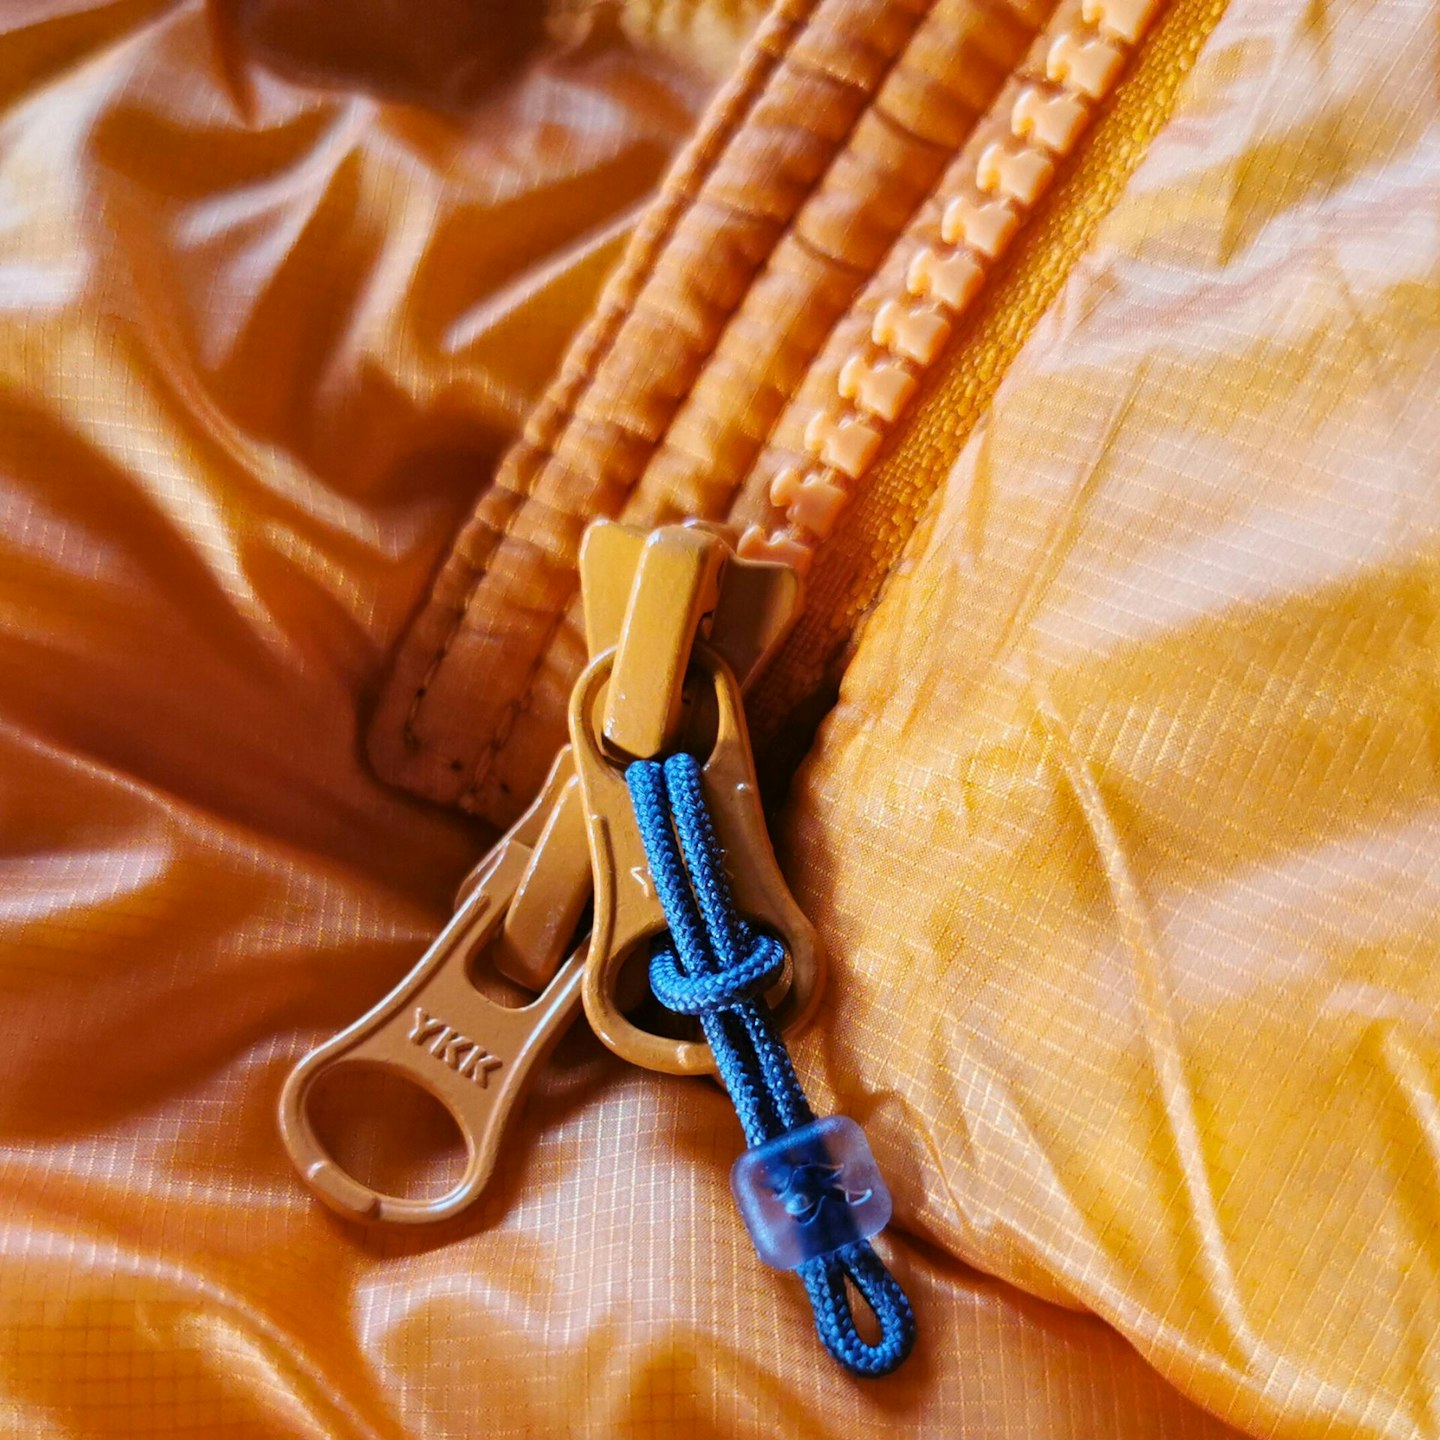 Rab Mythic Ultra zip puller